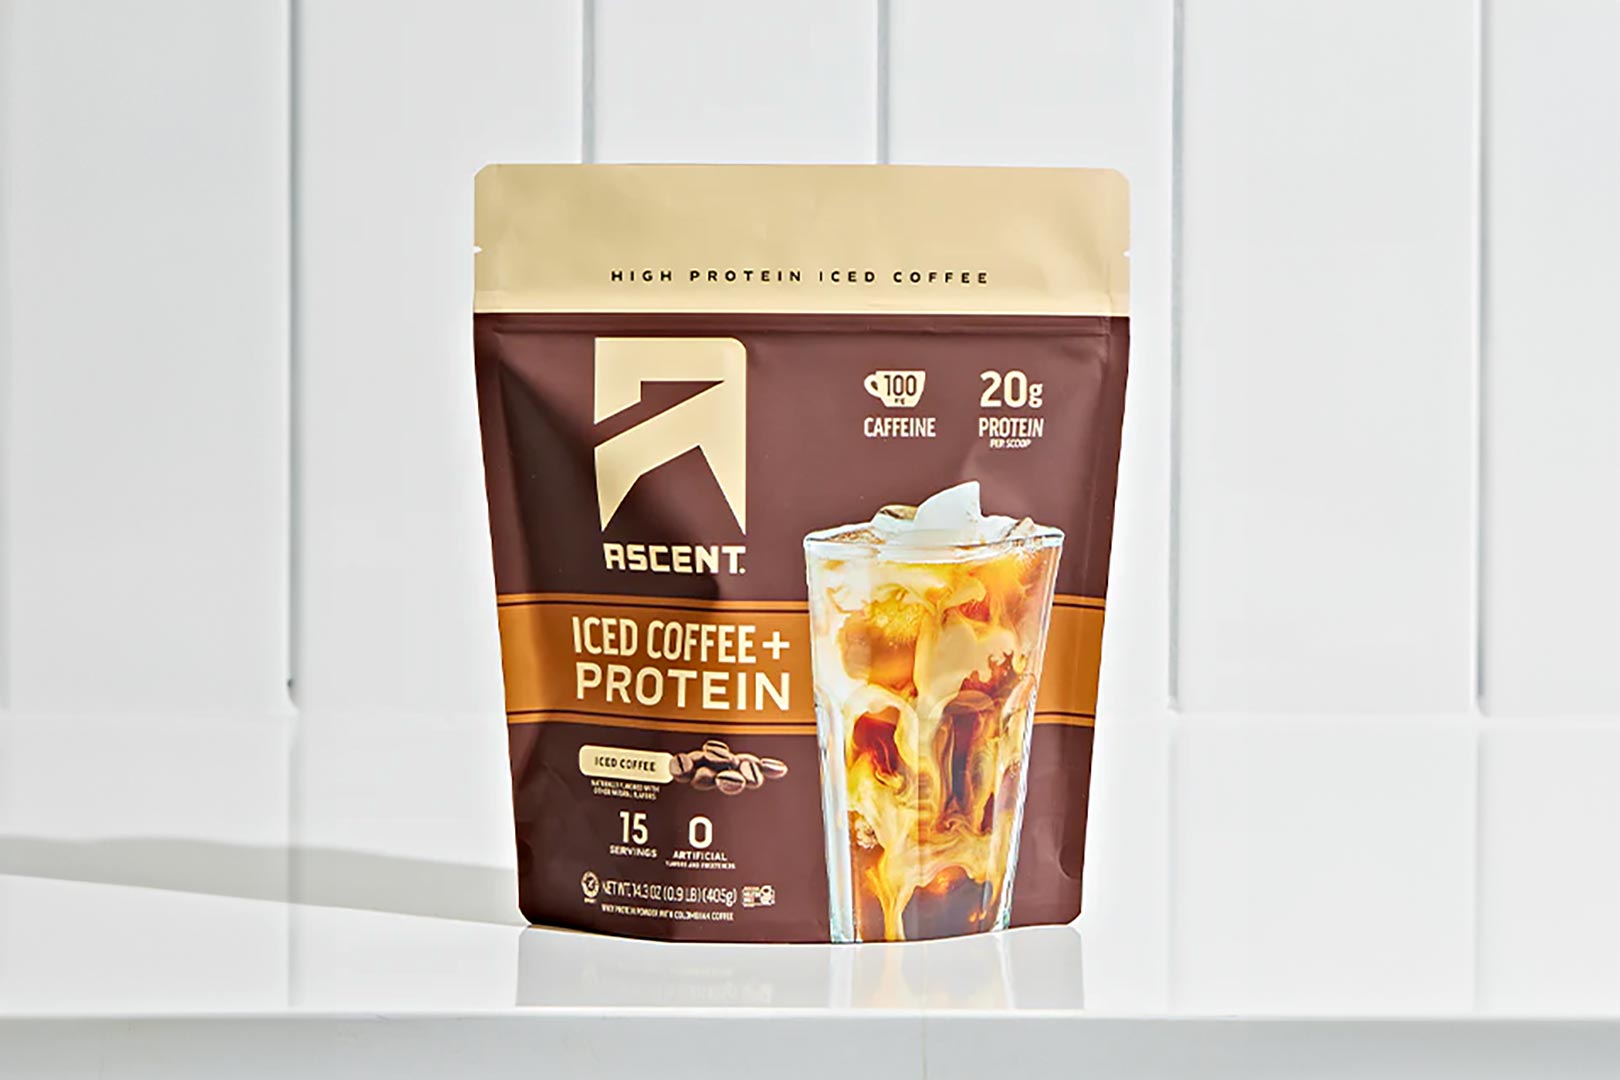 Ascent Iced Coffee Protein